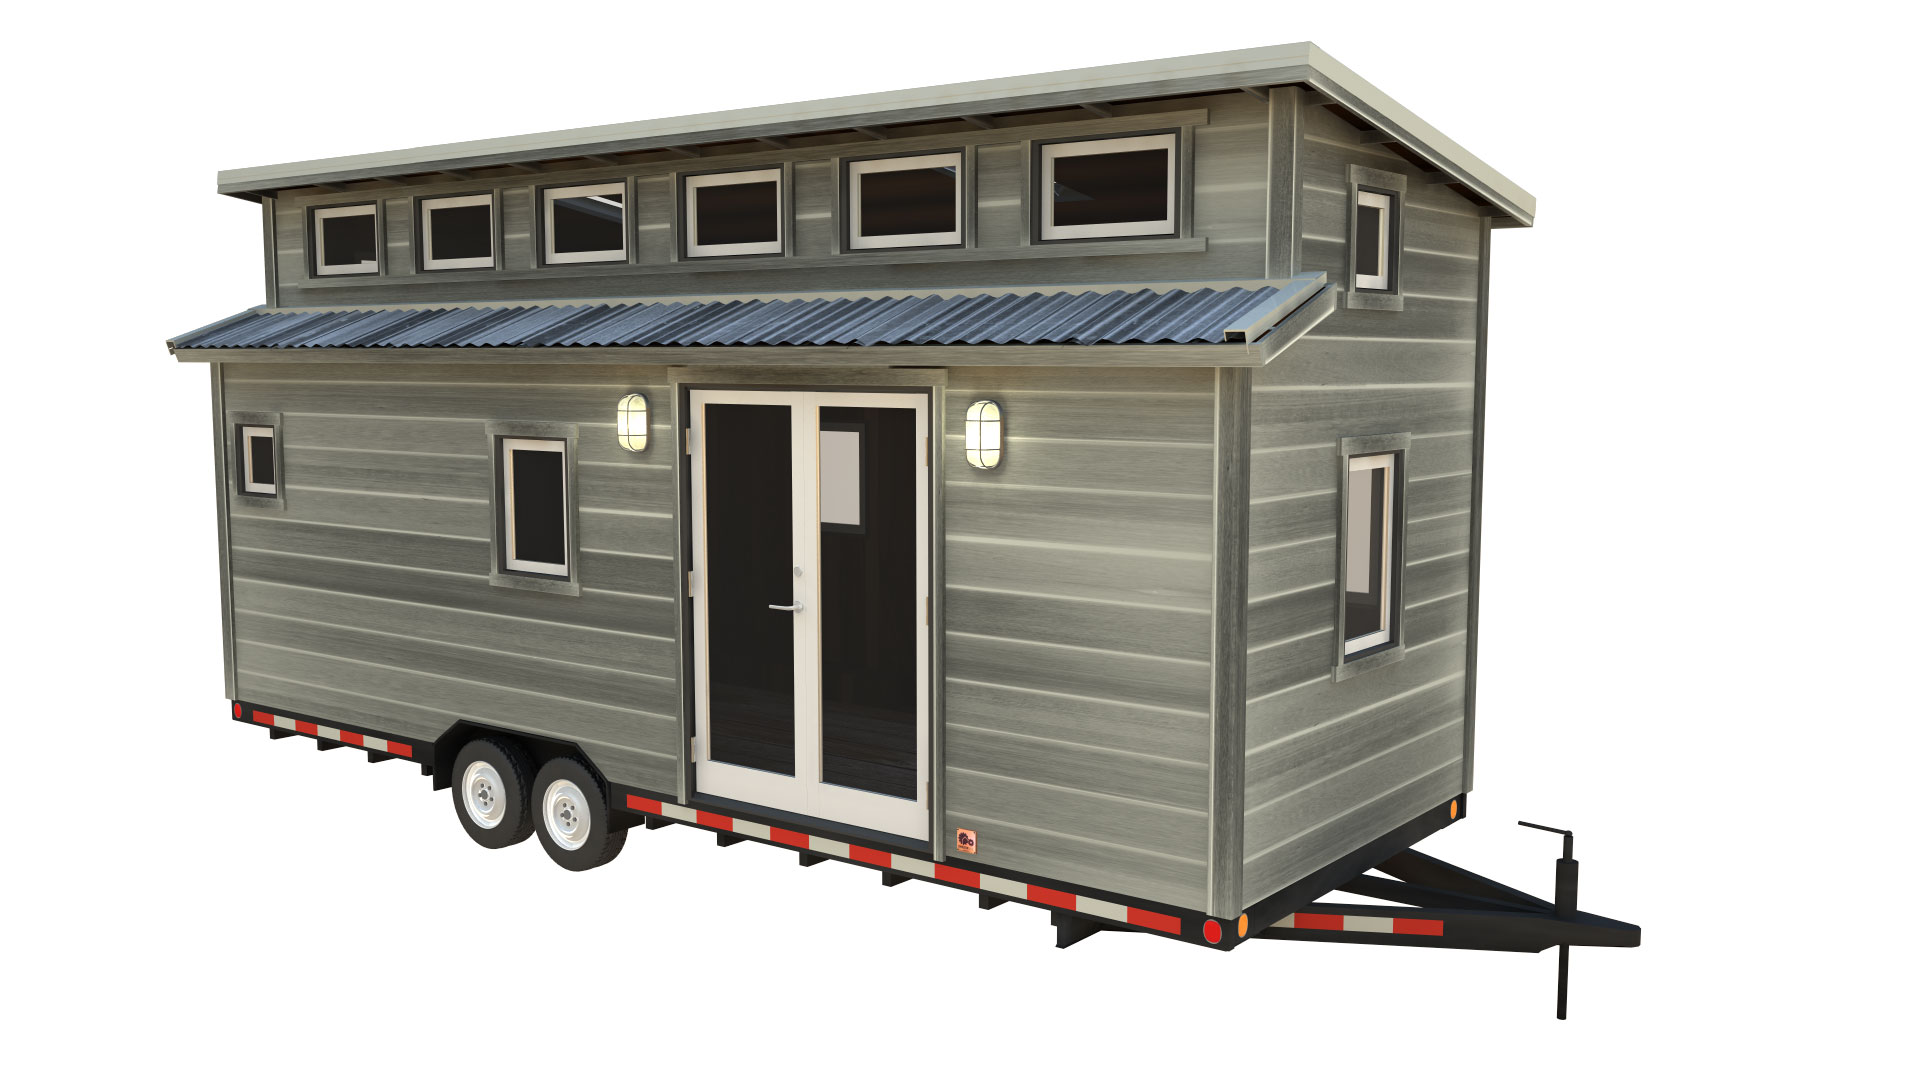 The Cider Box Modern Tiny  House  Plans  for Your Home  on Wheels